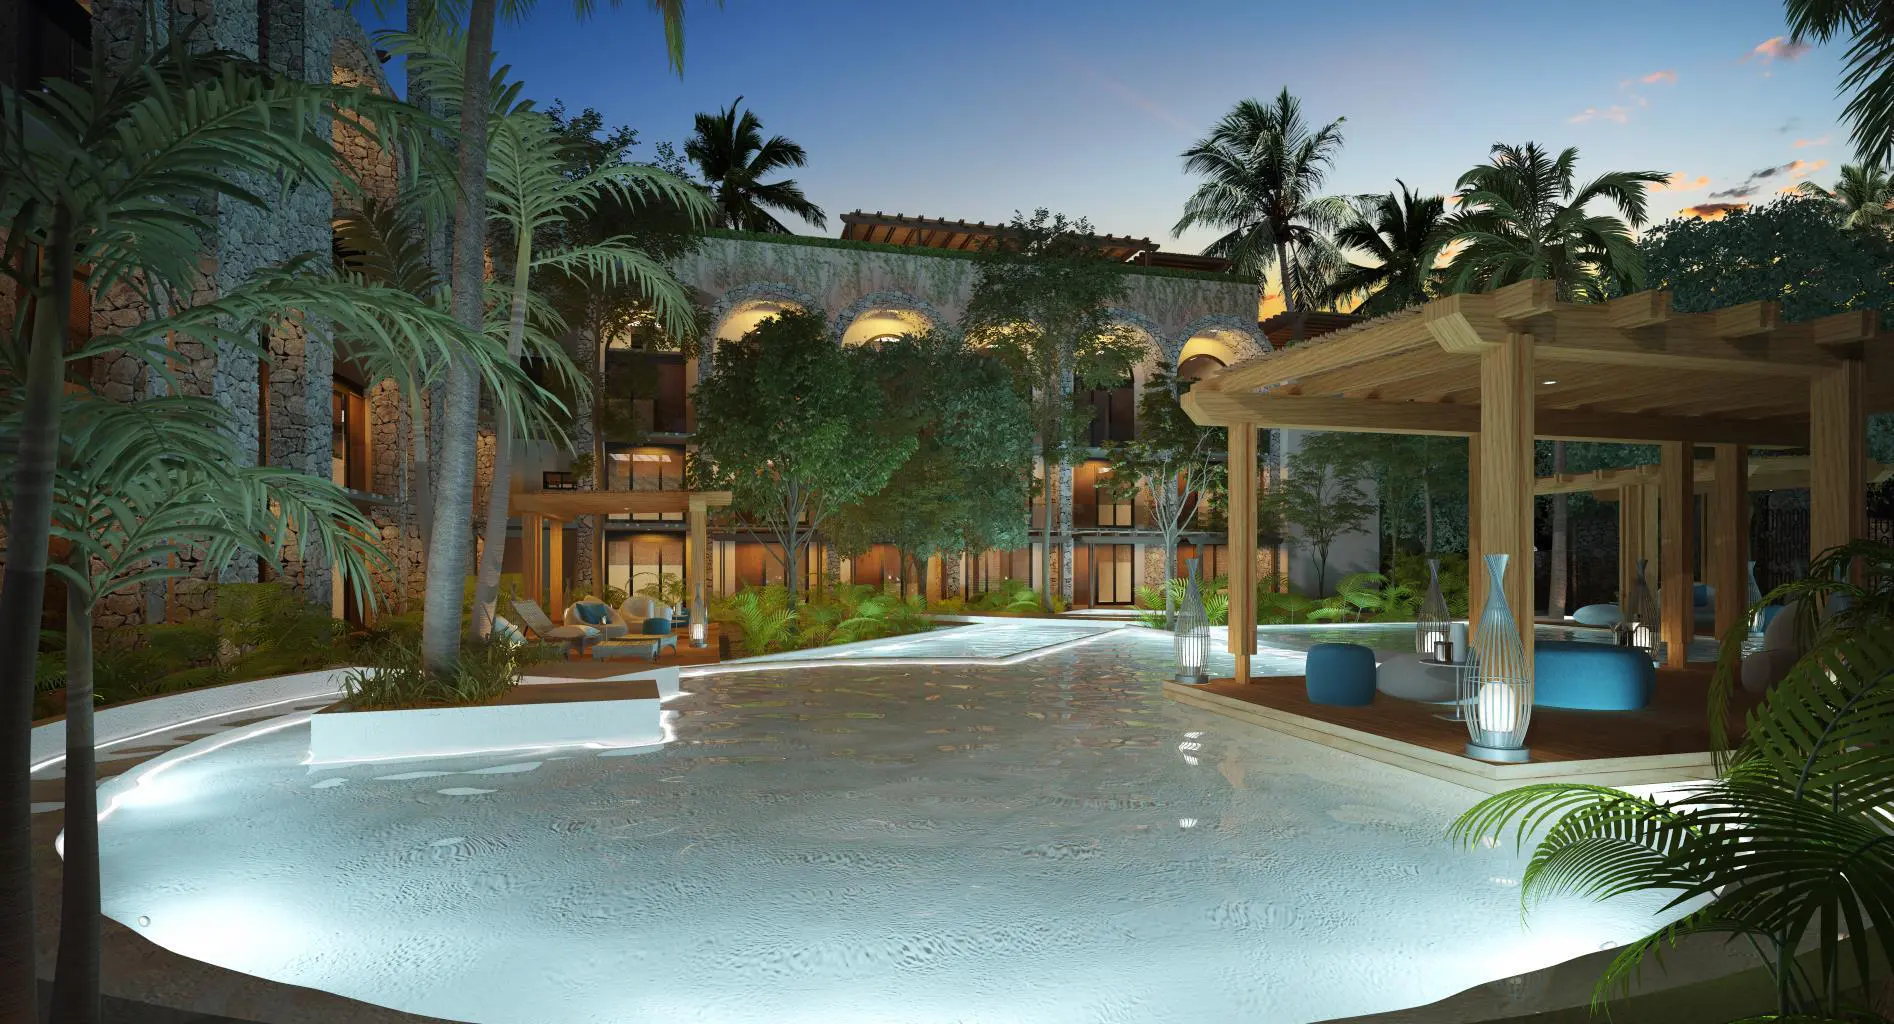 Tranquil 2BR apartment in Playacar, incredible opportunity!